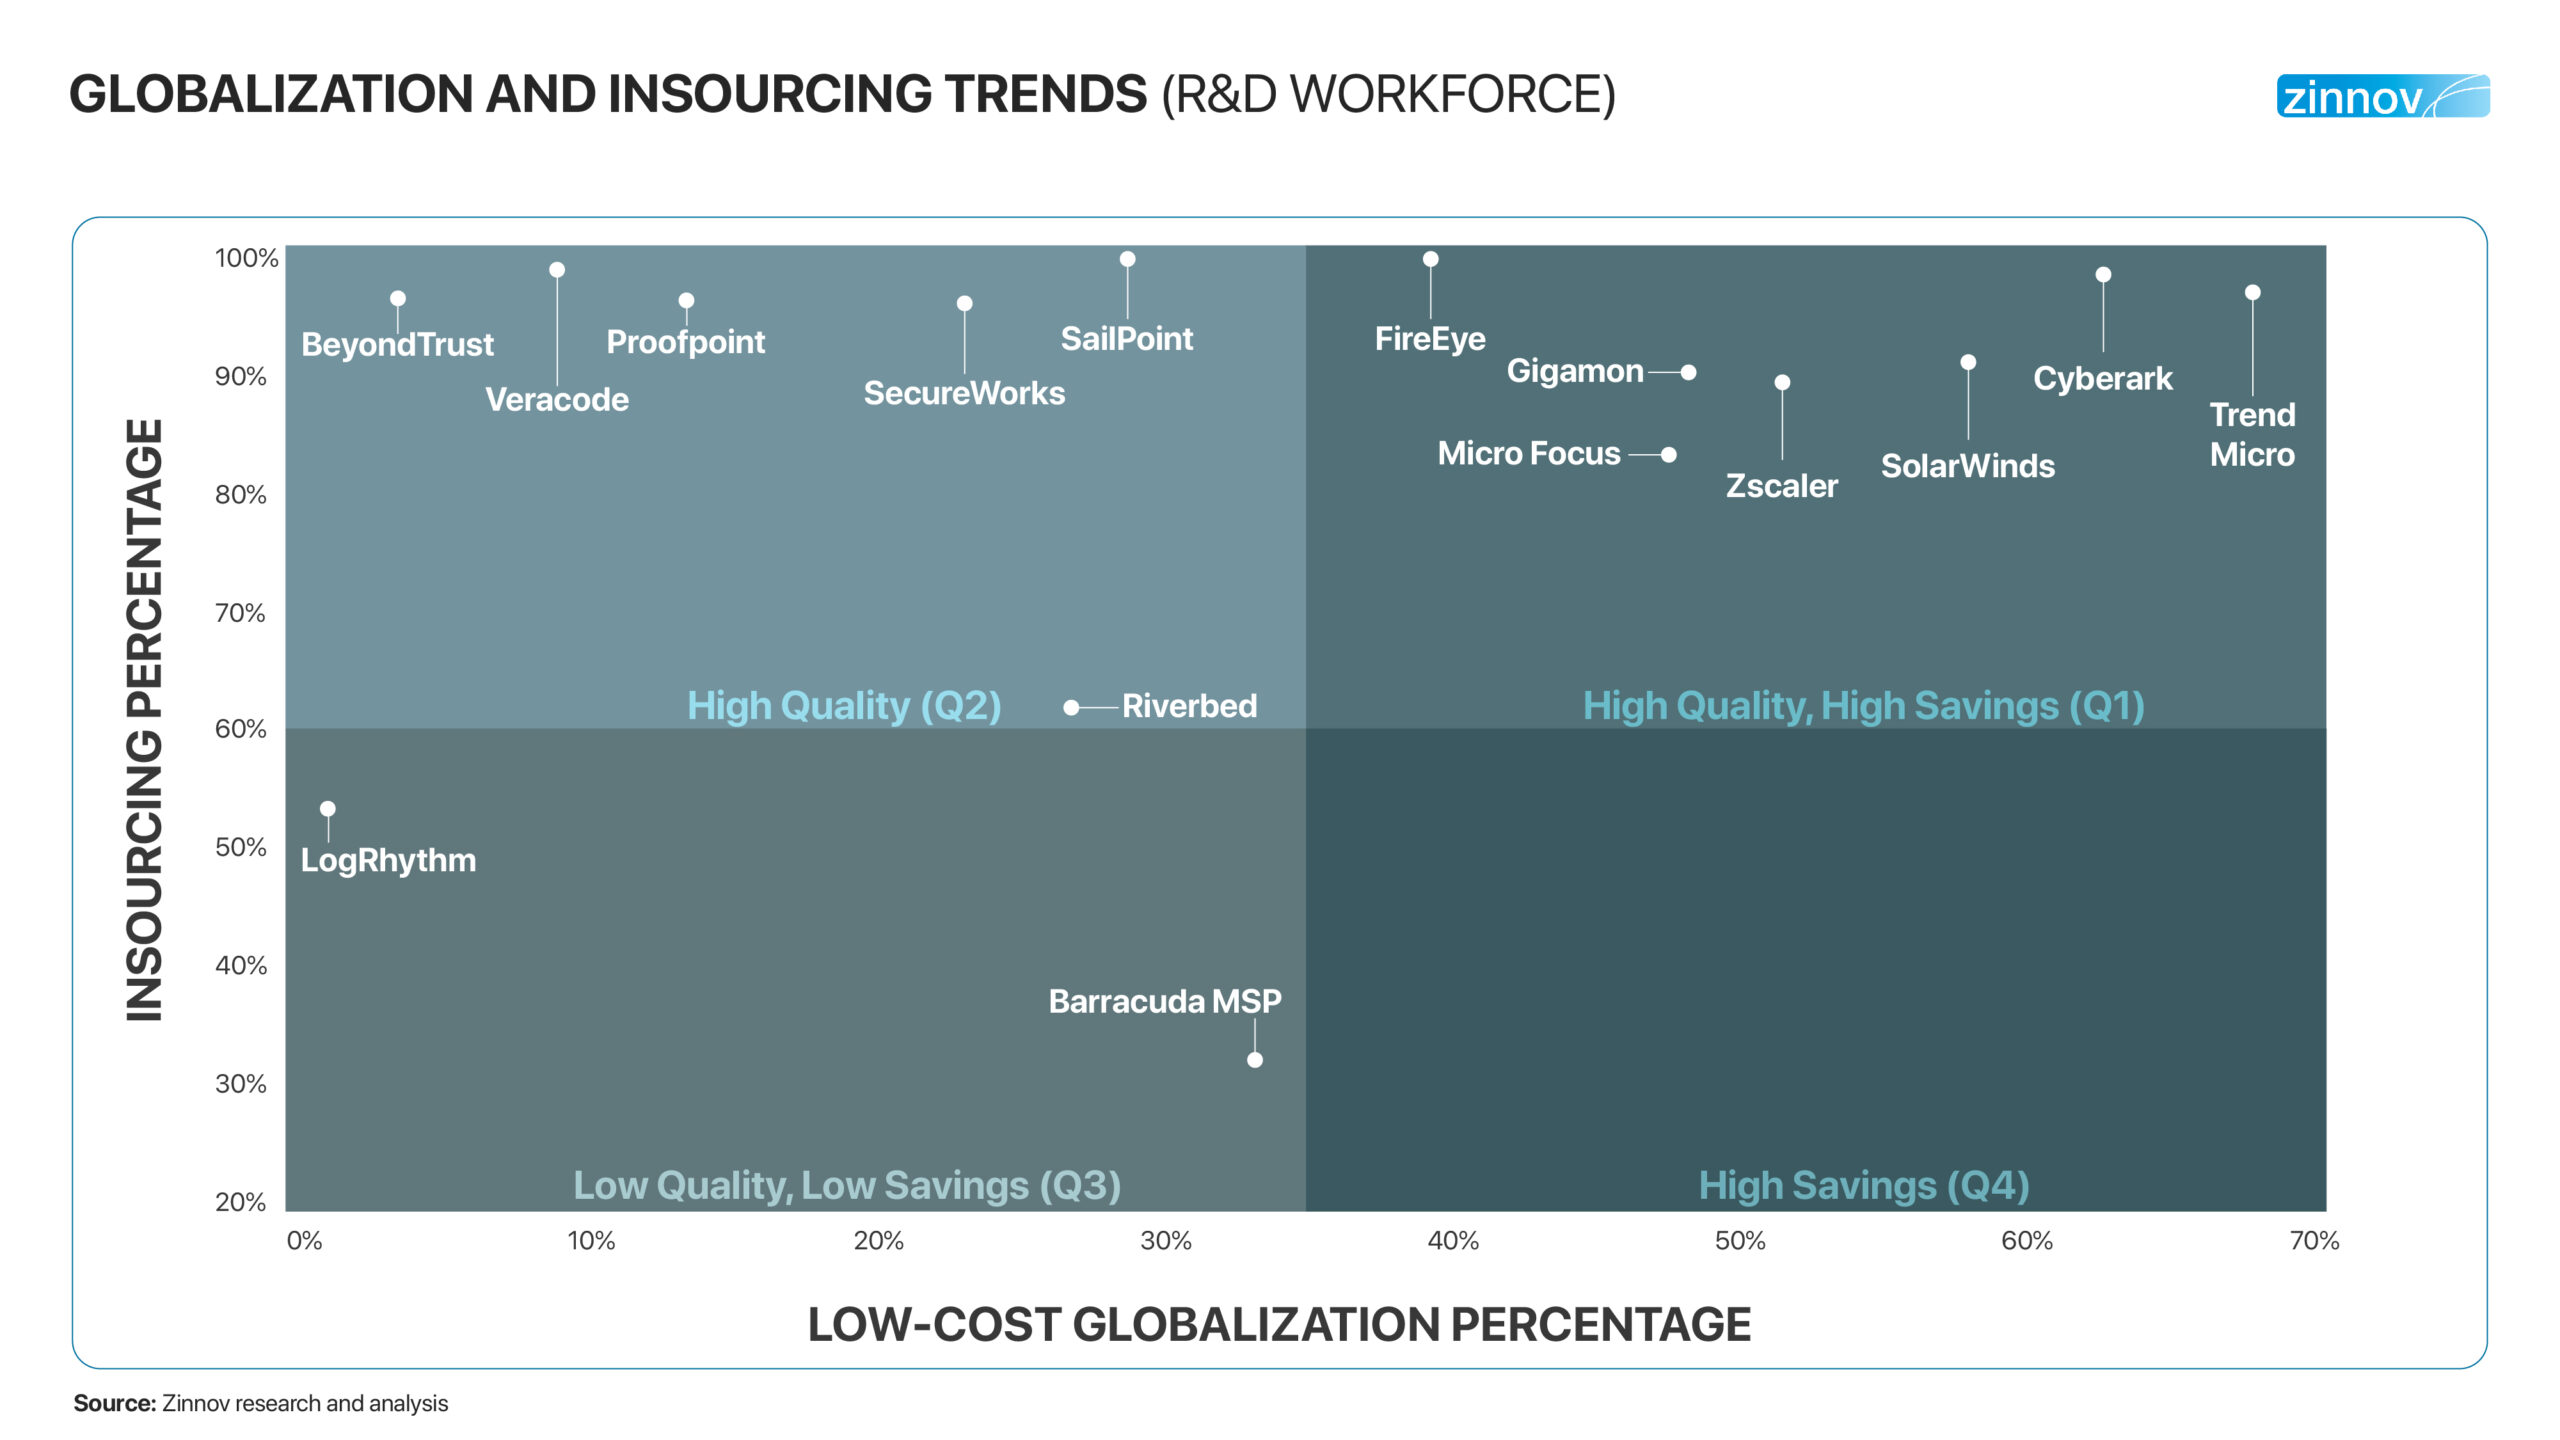 Globalization and insourcing trends